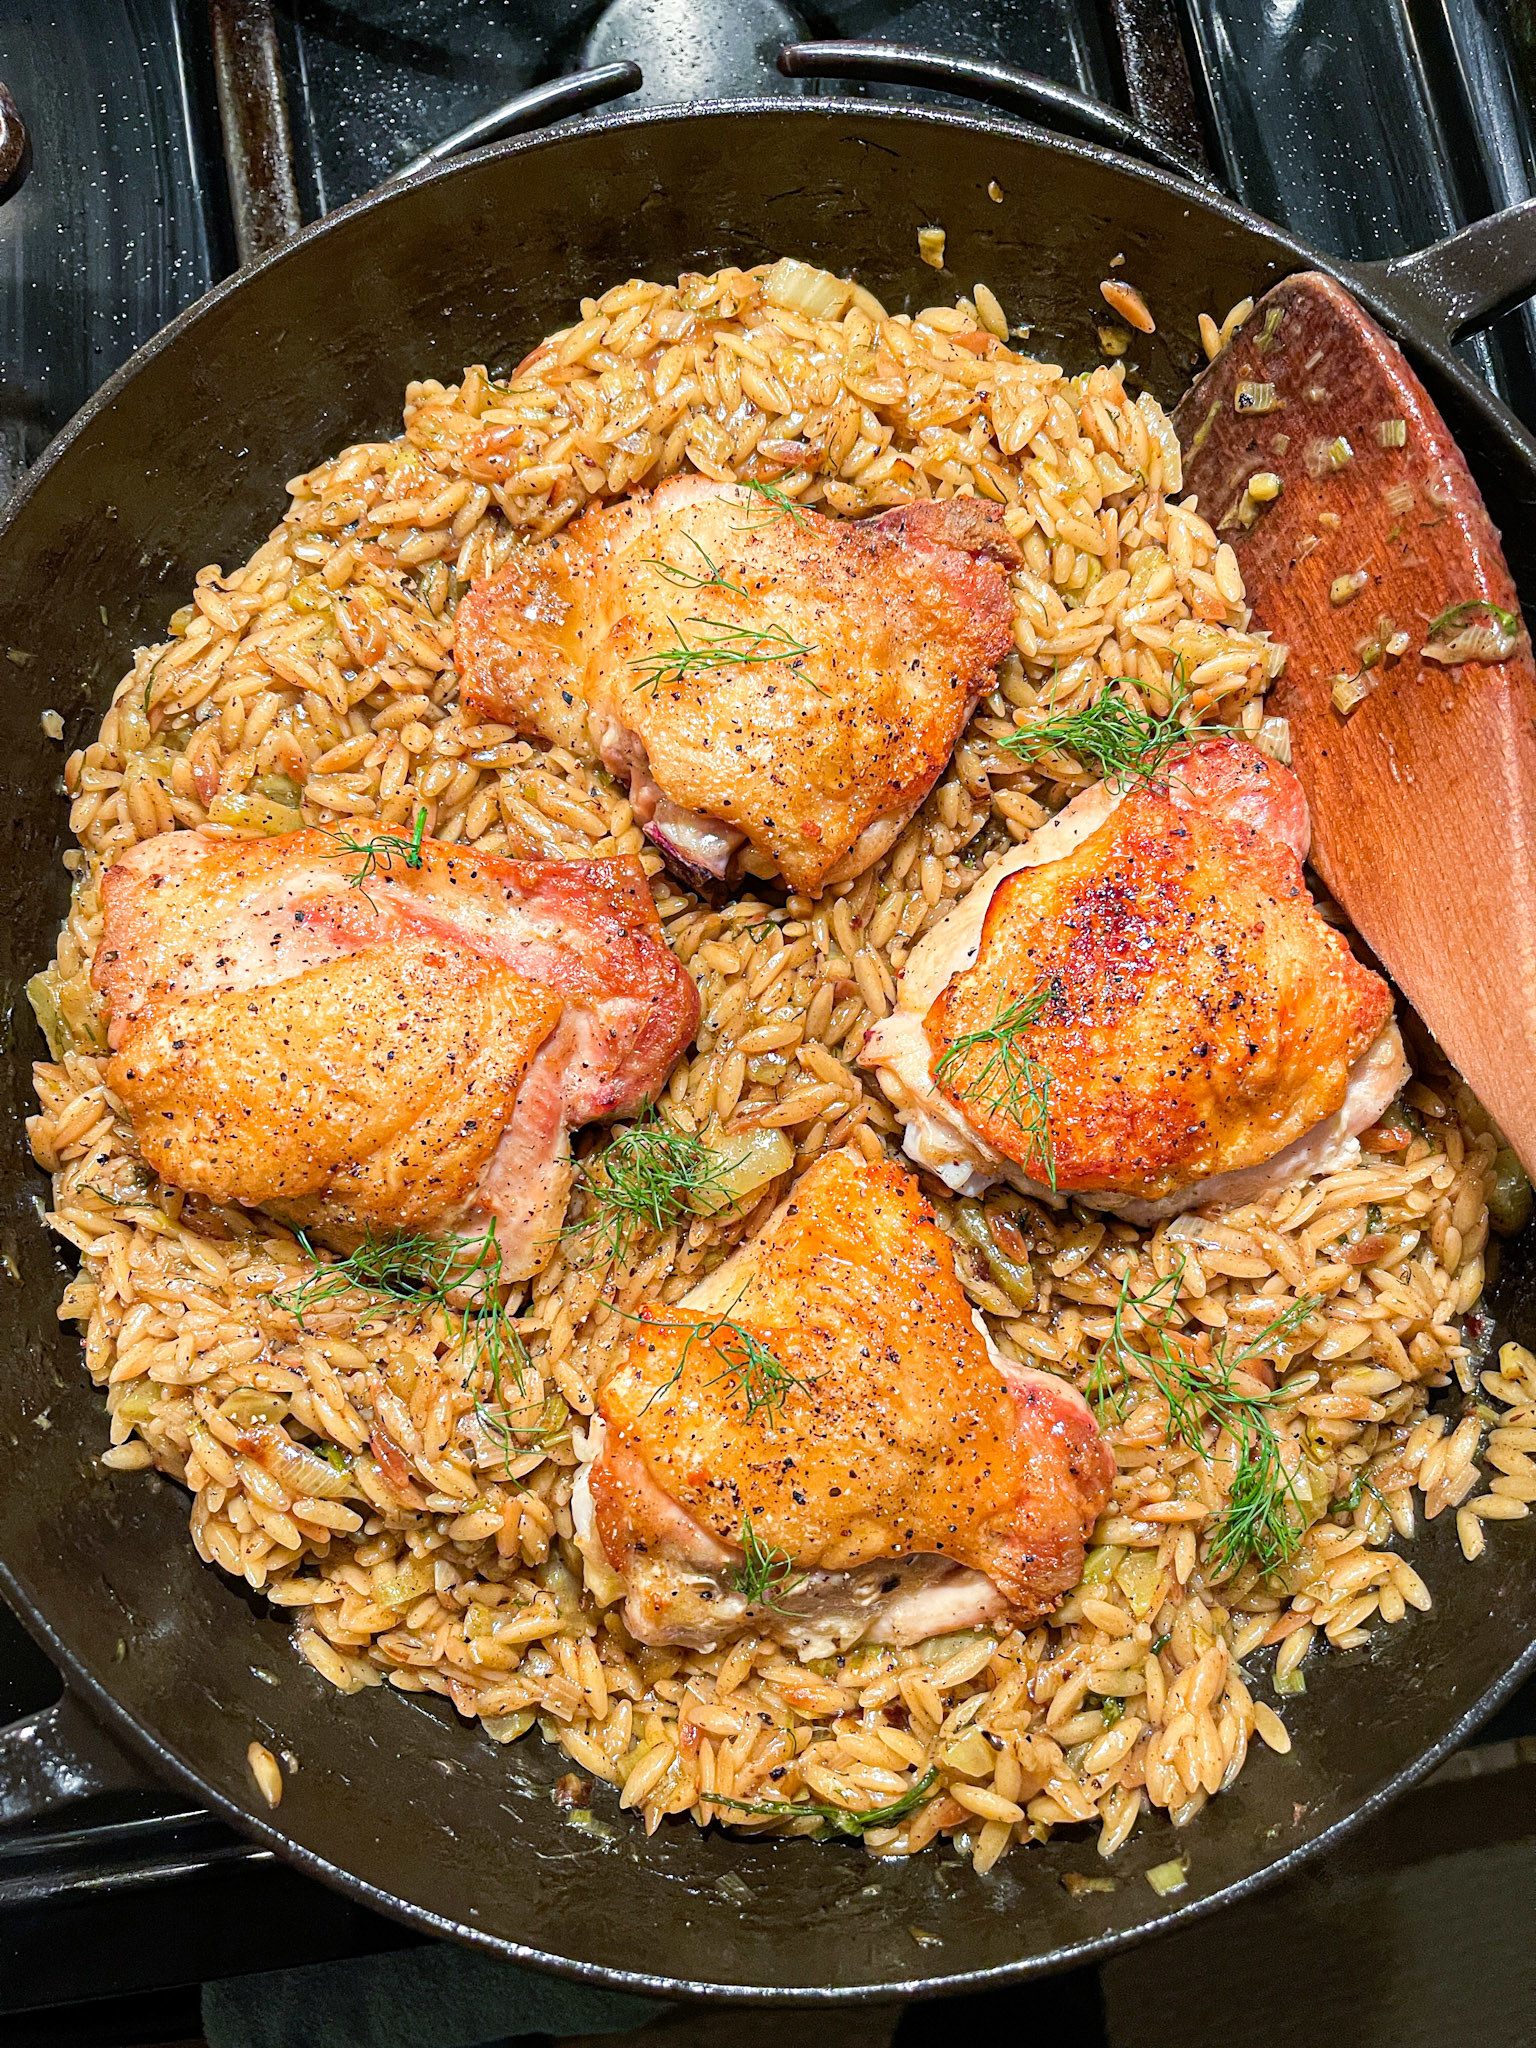 Crispy chicken thighs in a skillet on top of orzo with fennel fronds for garnish.